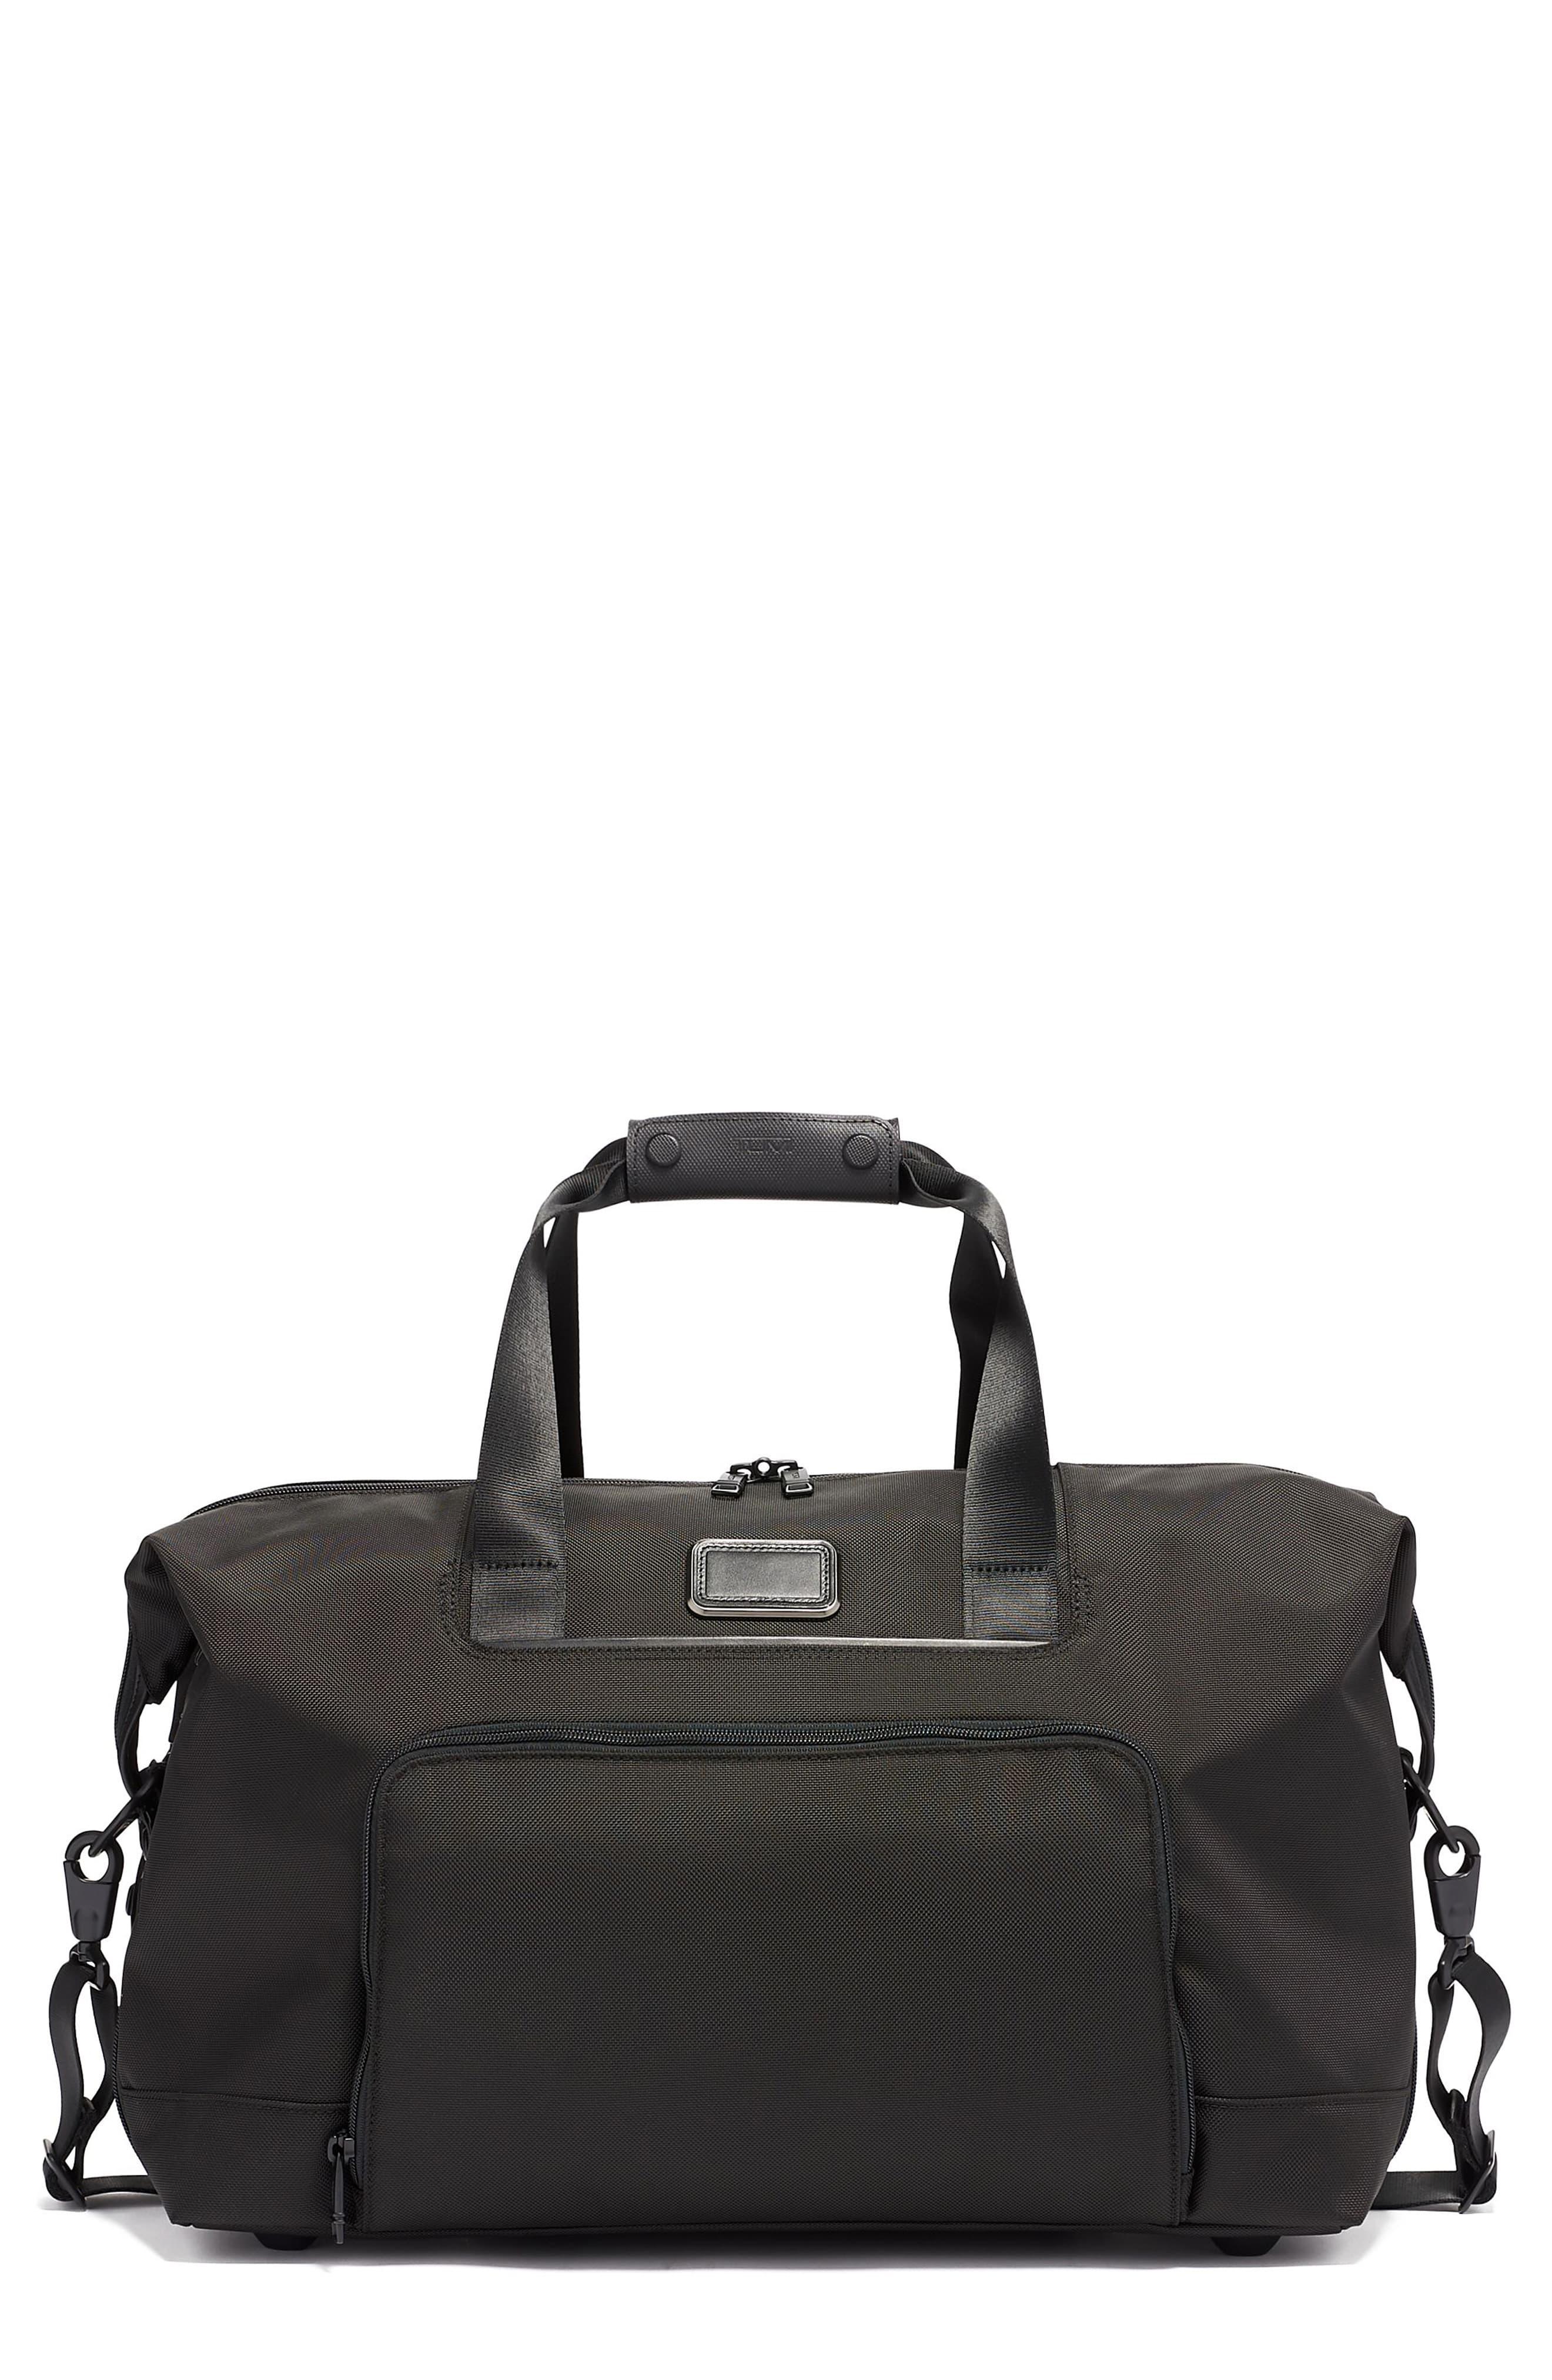 Tumi Alpha 3 Double Expansion Satchel in Black for Men - Lyst